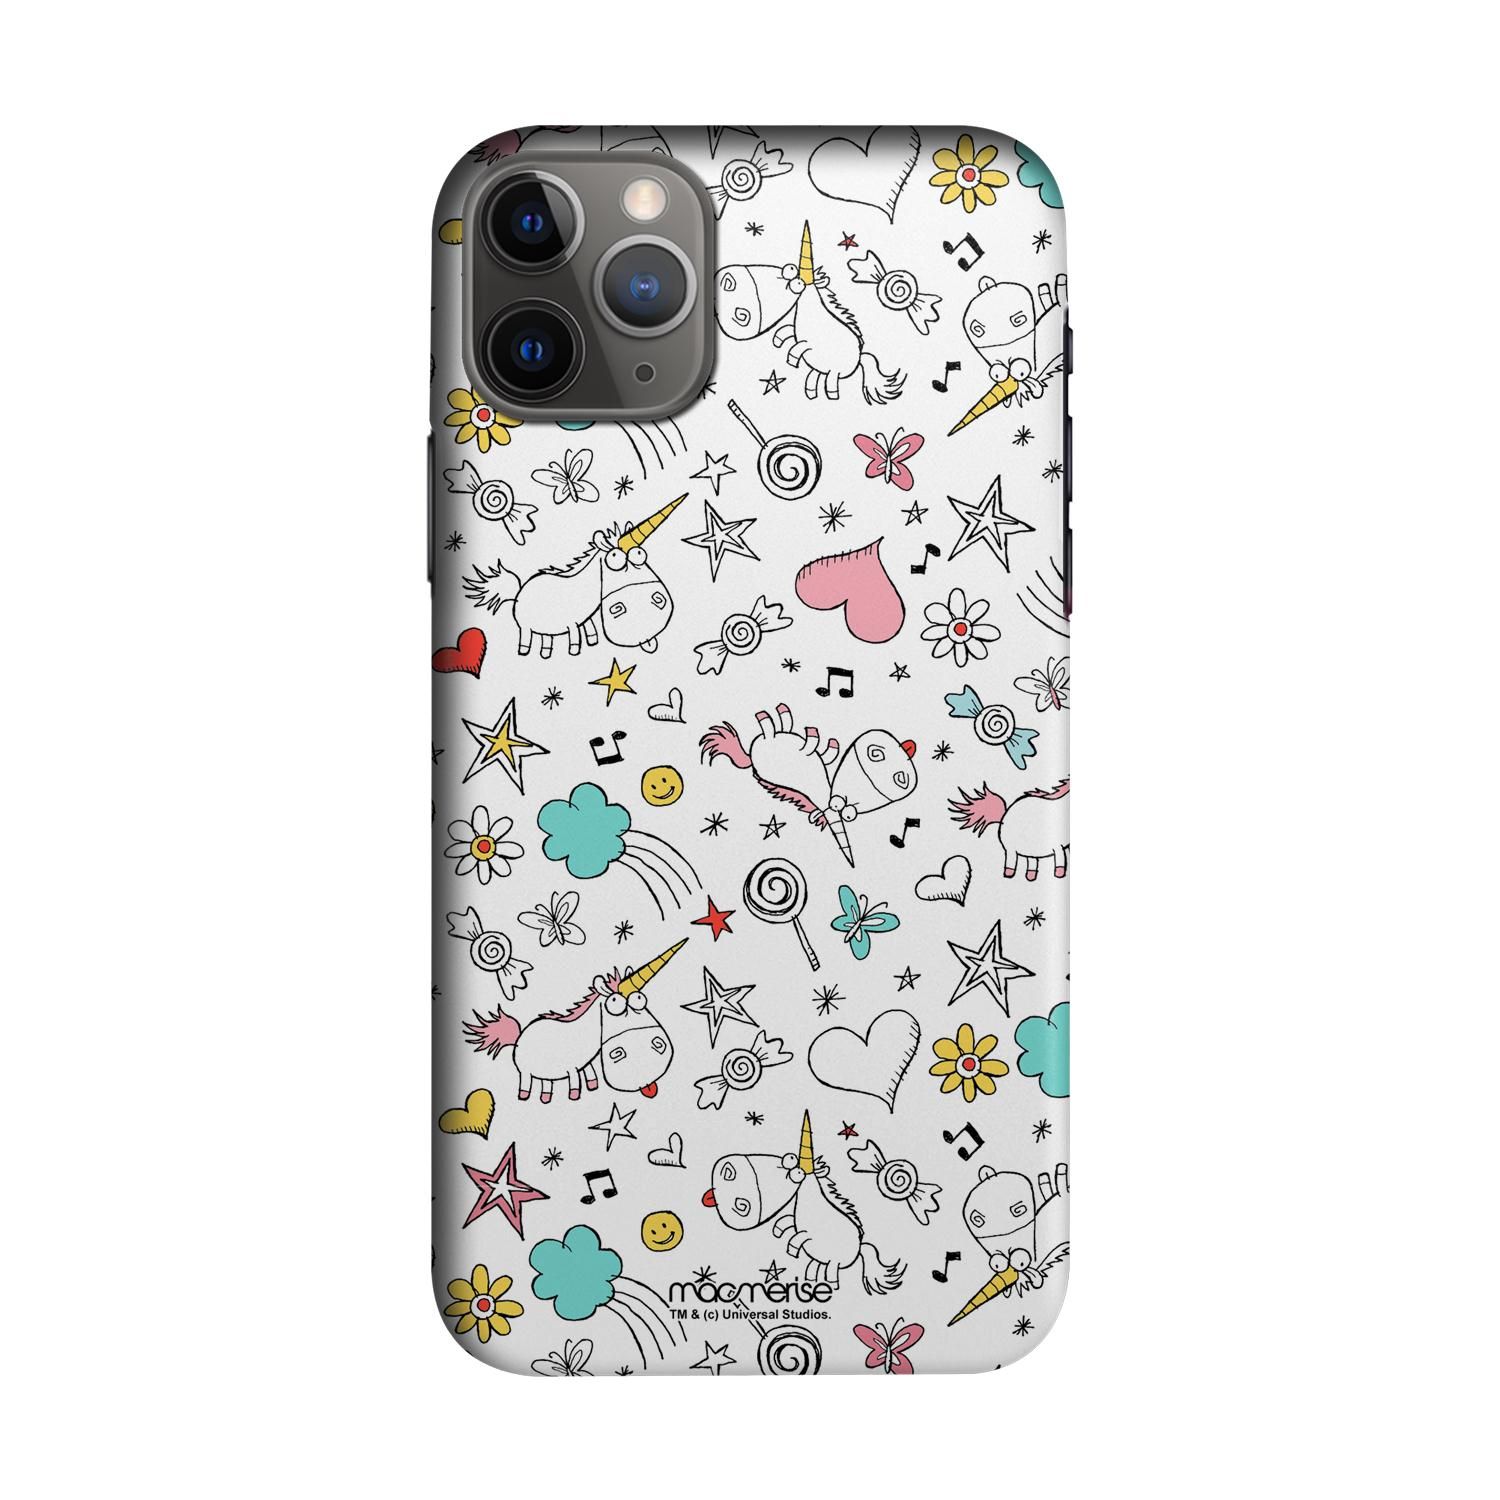 Buy Dreamy Pattern - Sleek Phone Case for iPhone 11 Pro Max Online